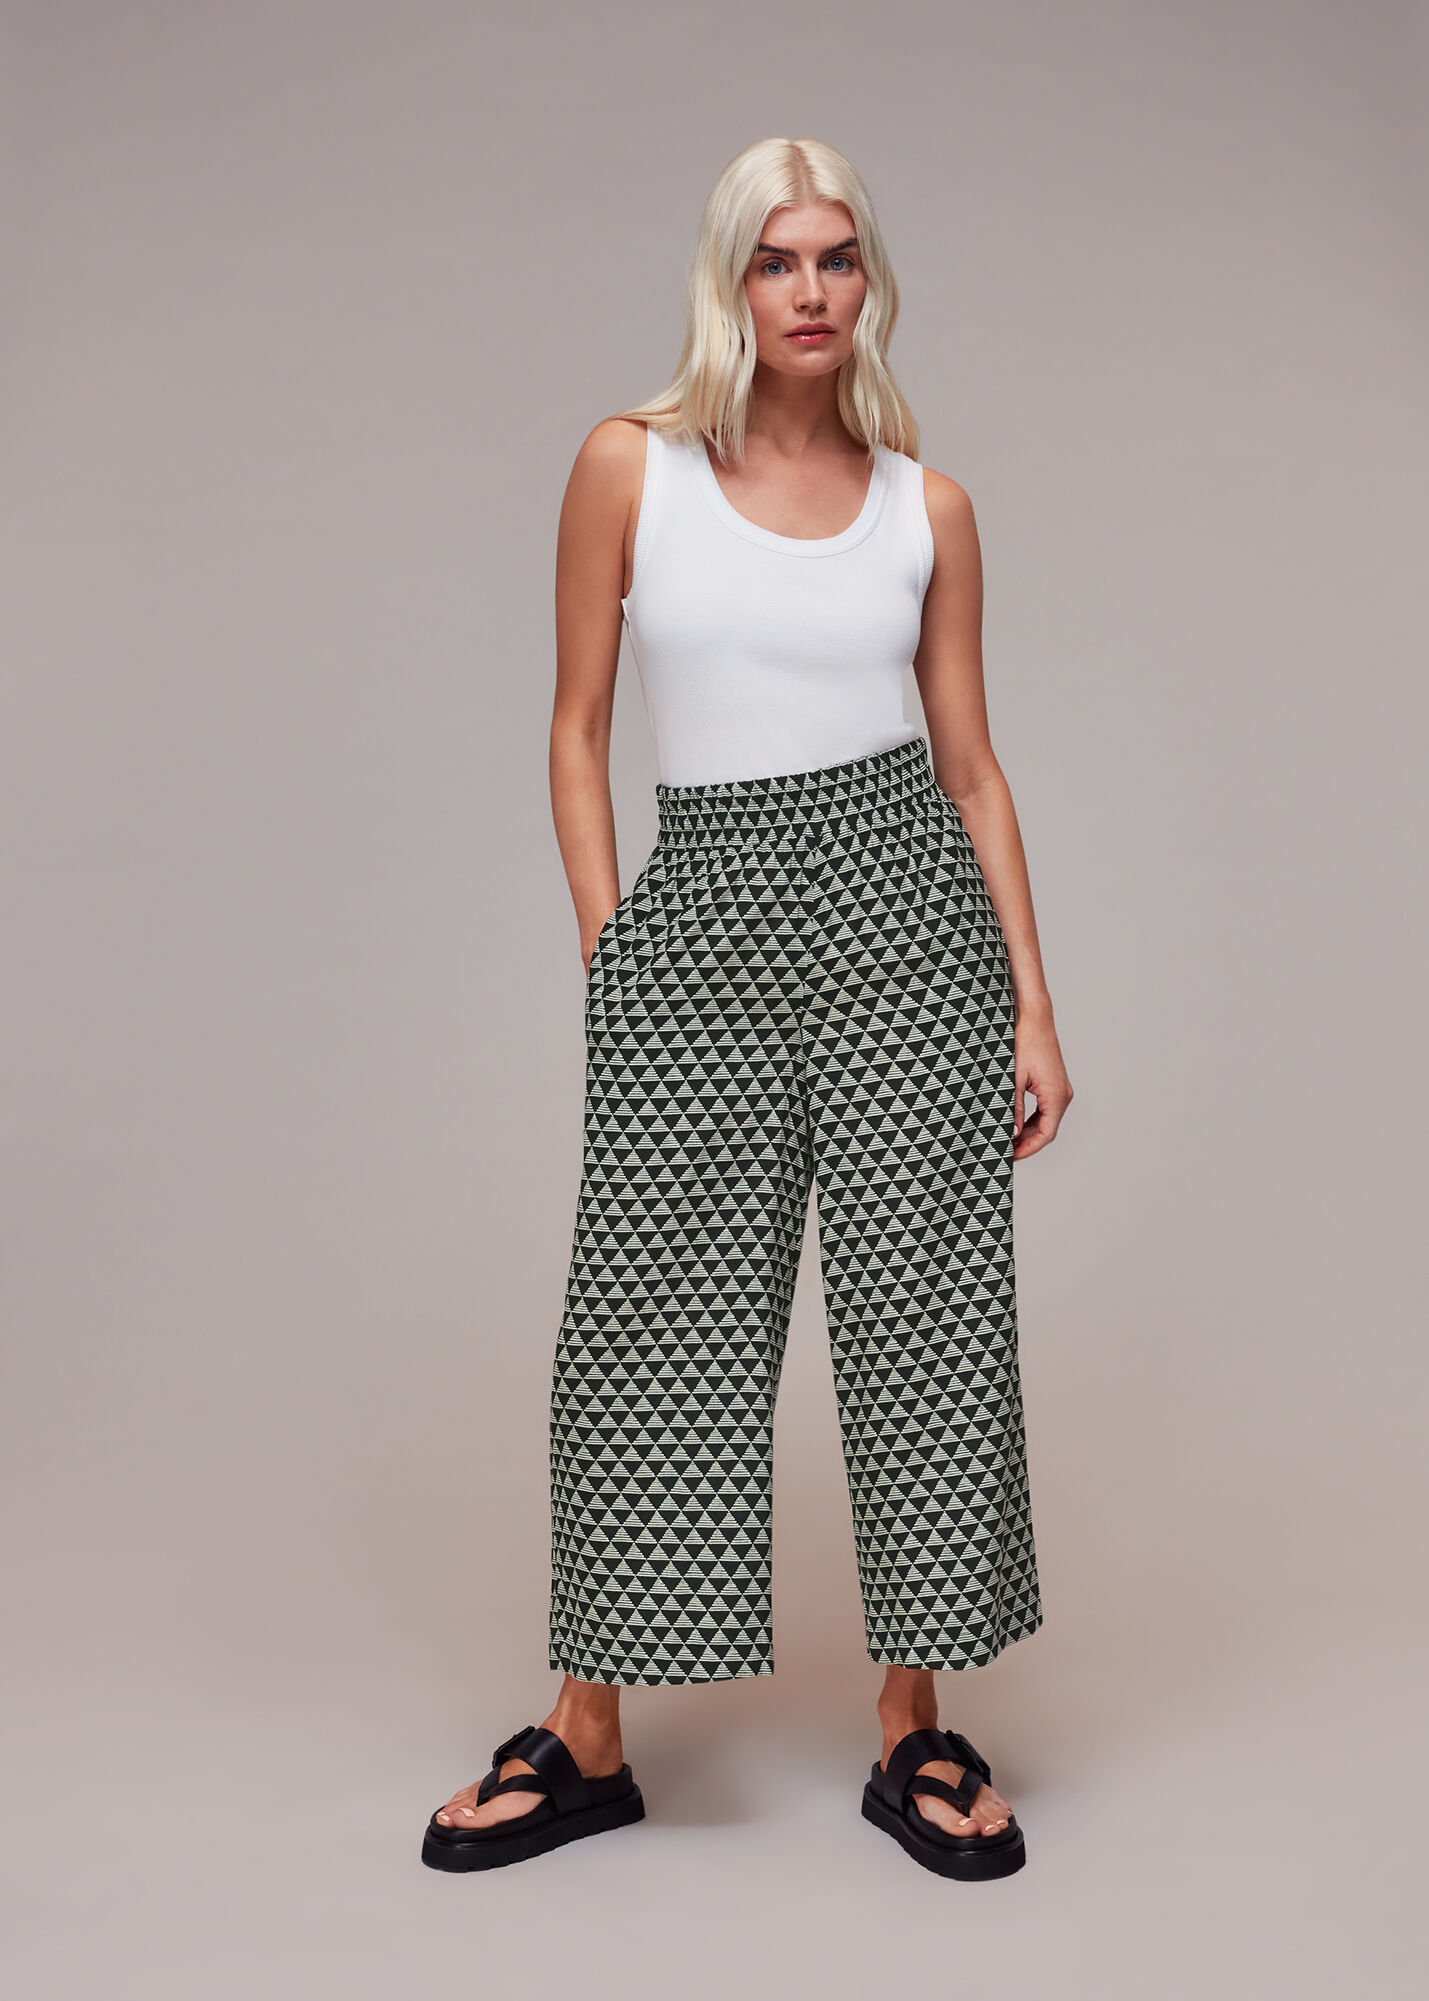 Best Patterned Pants for 2023  Stylish Printed Pants for Women